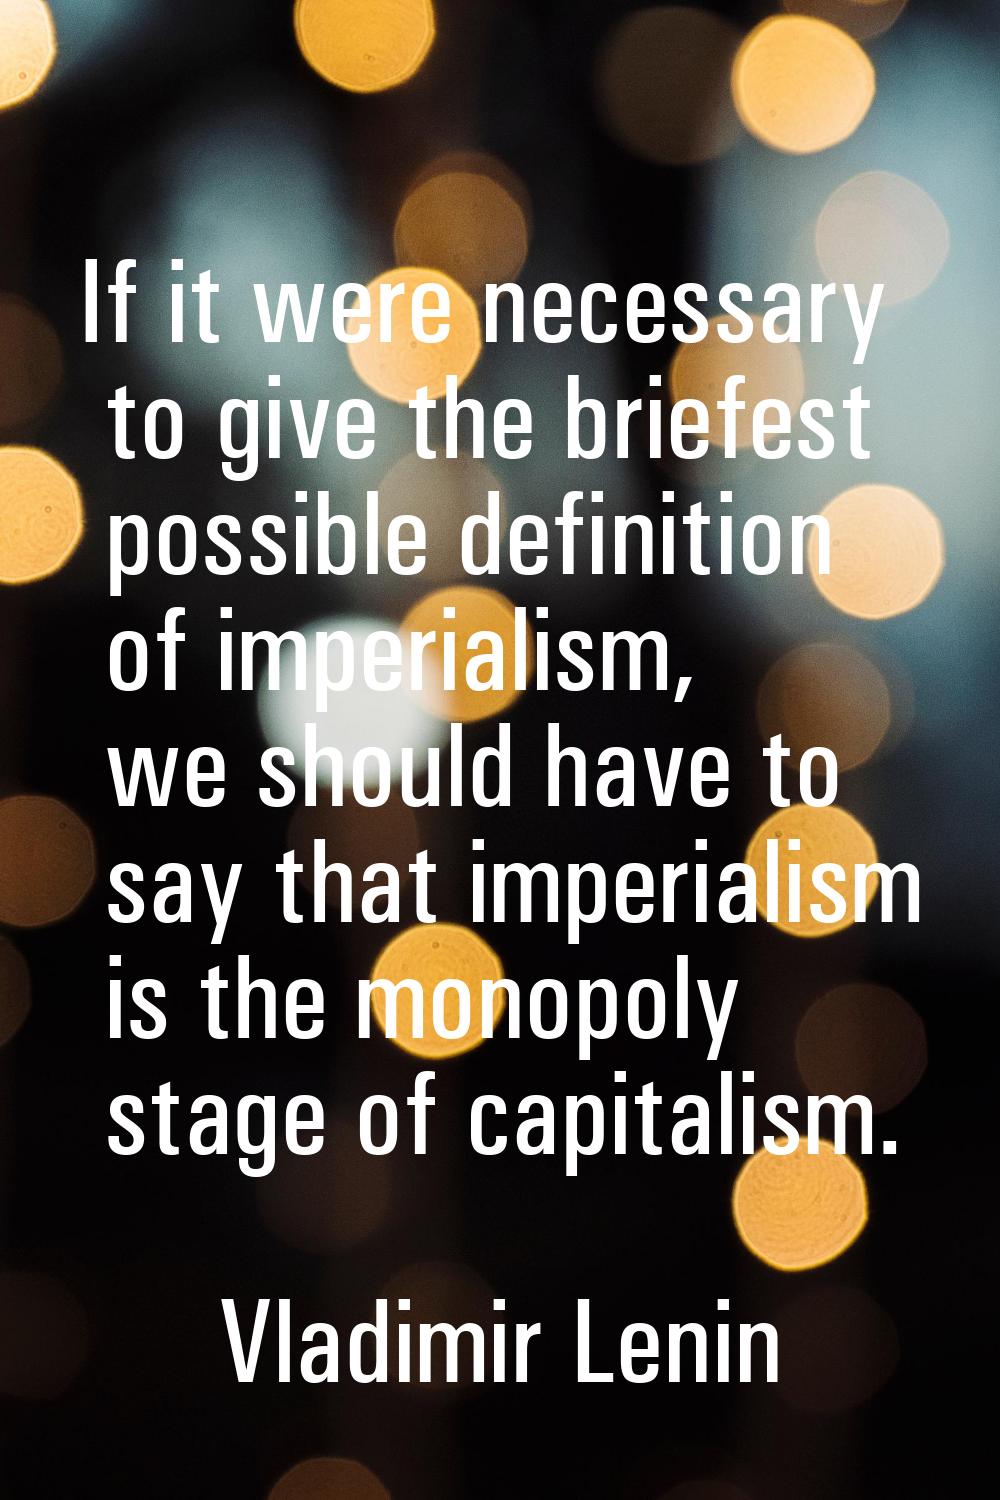 If it were necessary to give the briefest possible definition of imperialism, we should have to say